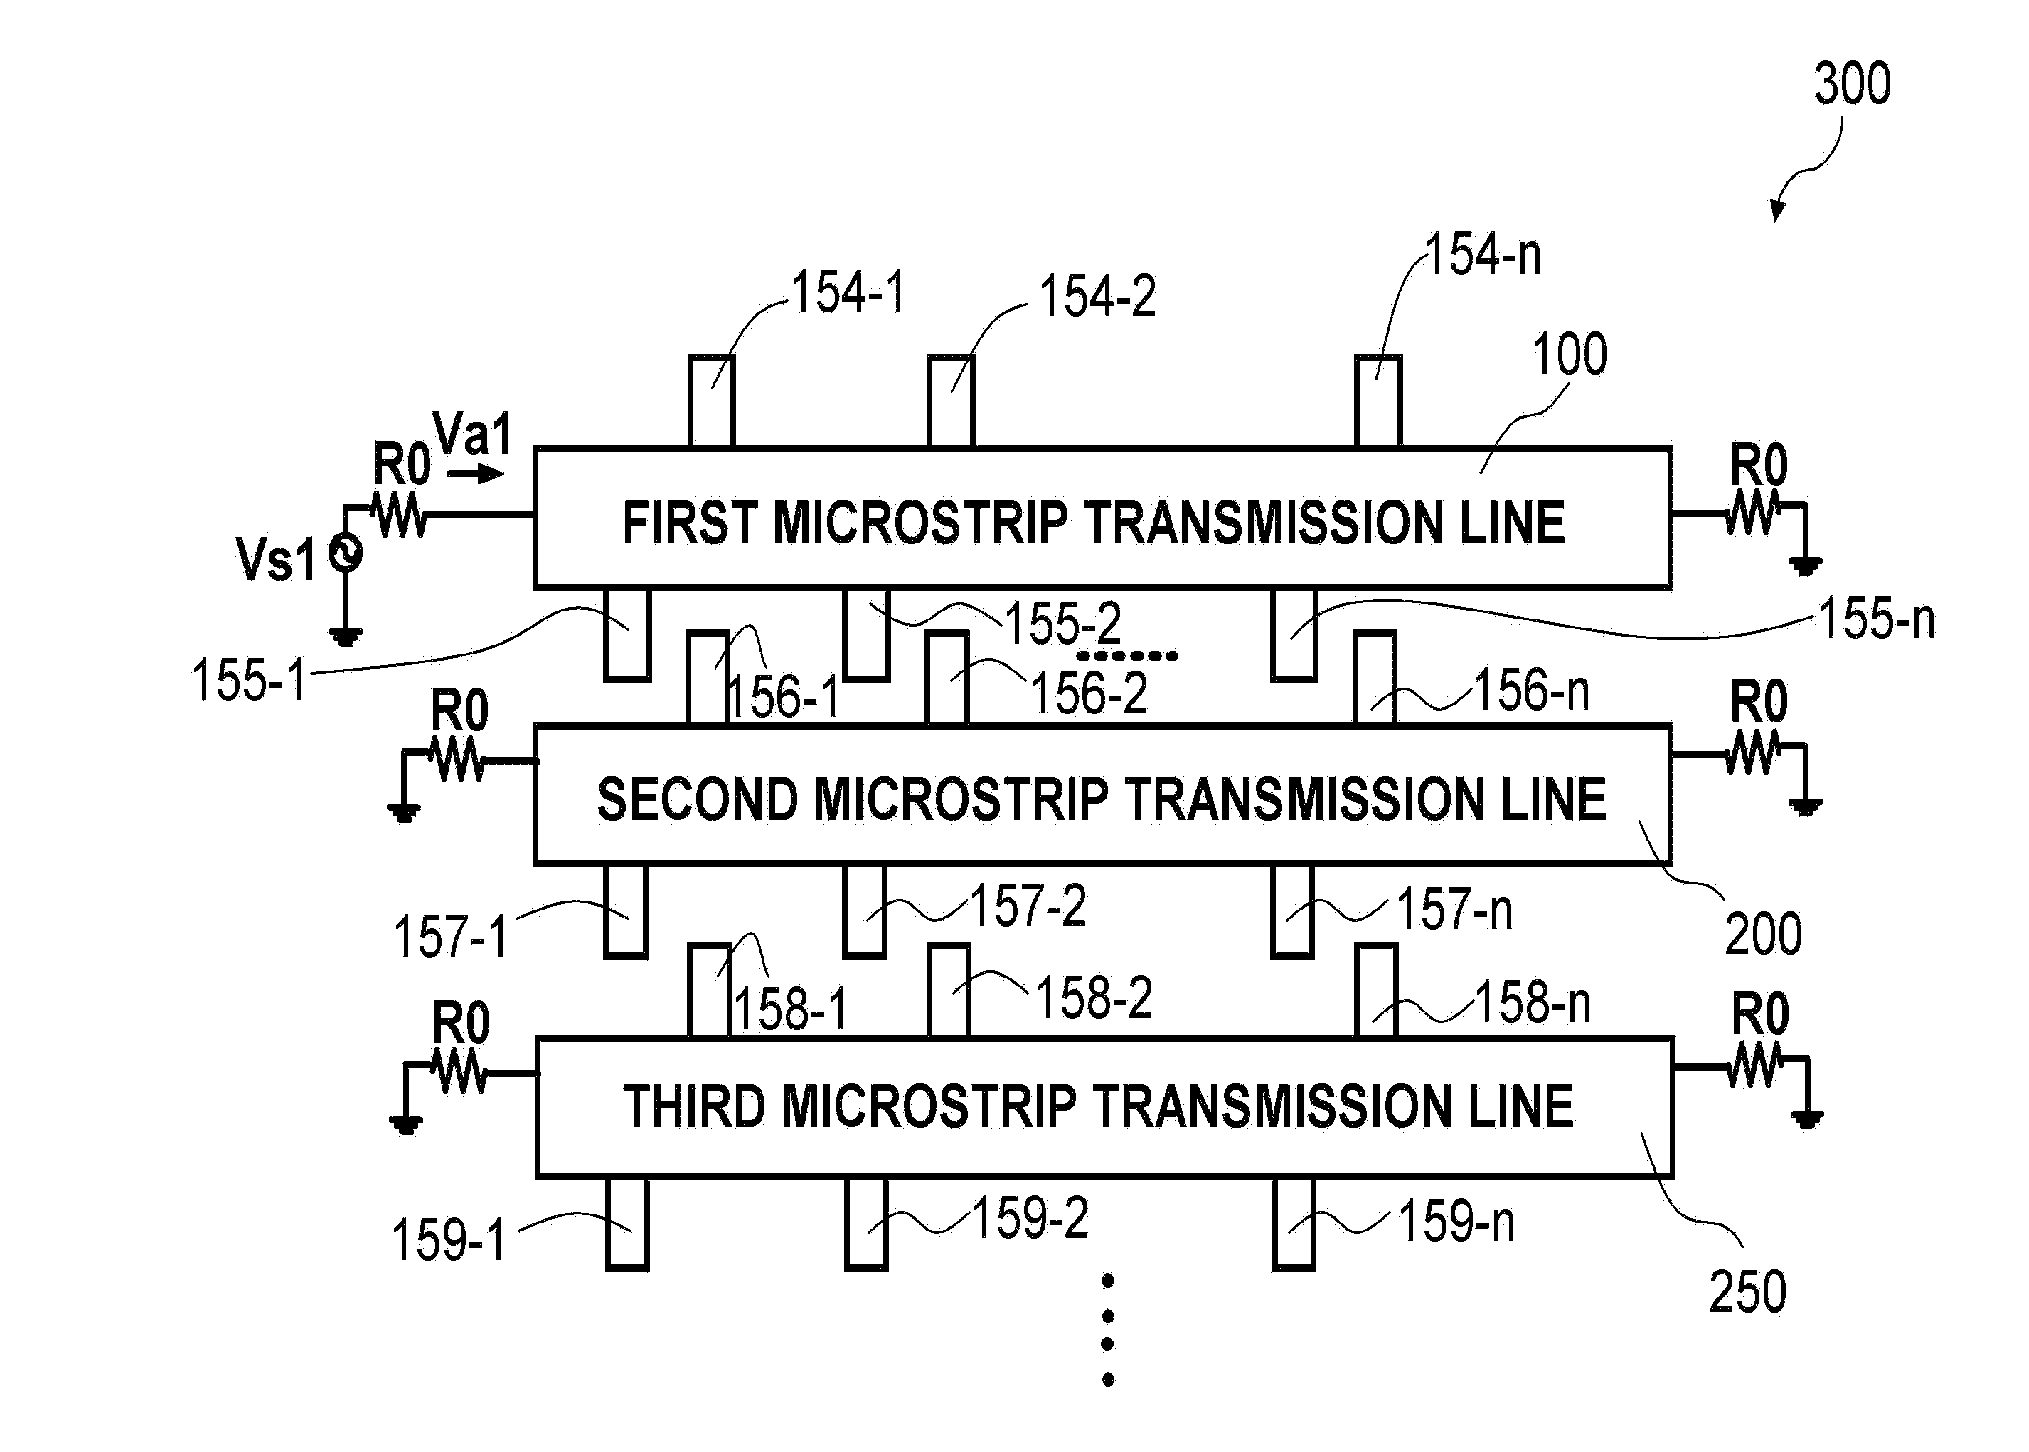 Mictostrip transmission line structure with vertical stubs for reducing far-end crosstalk